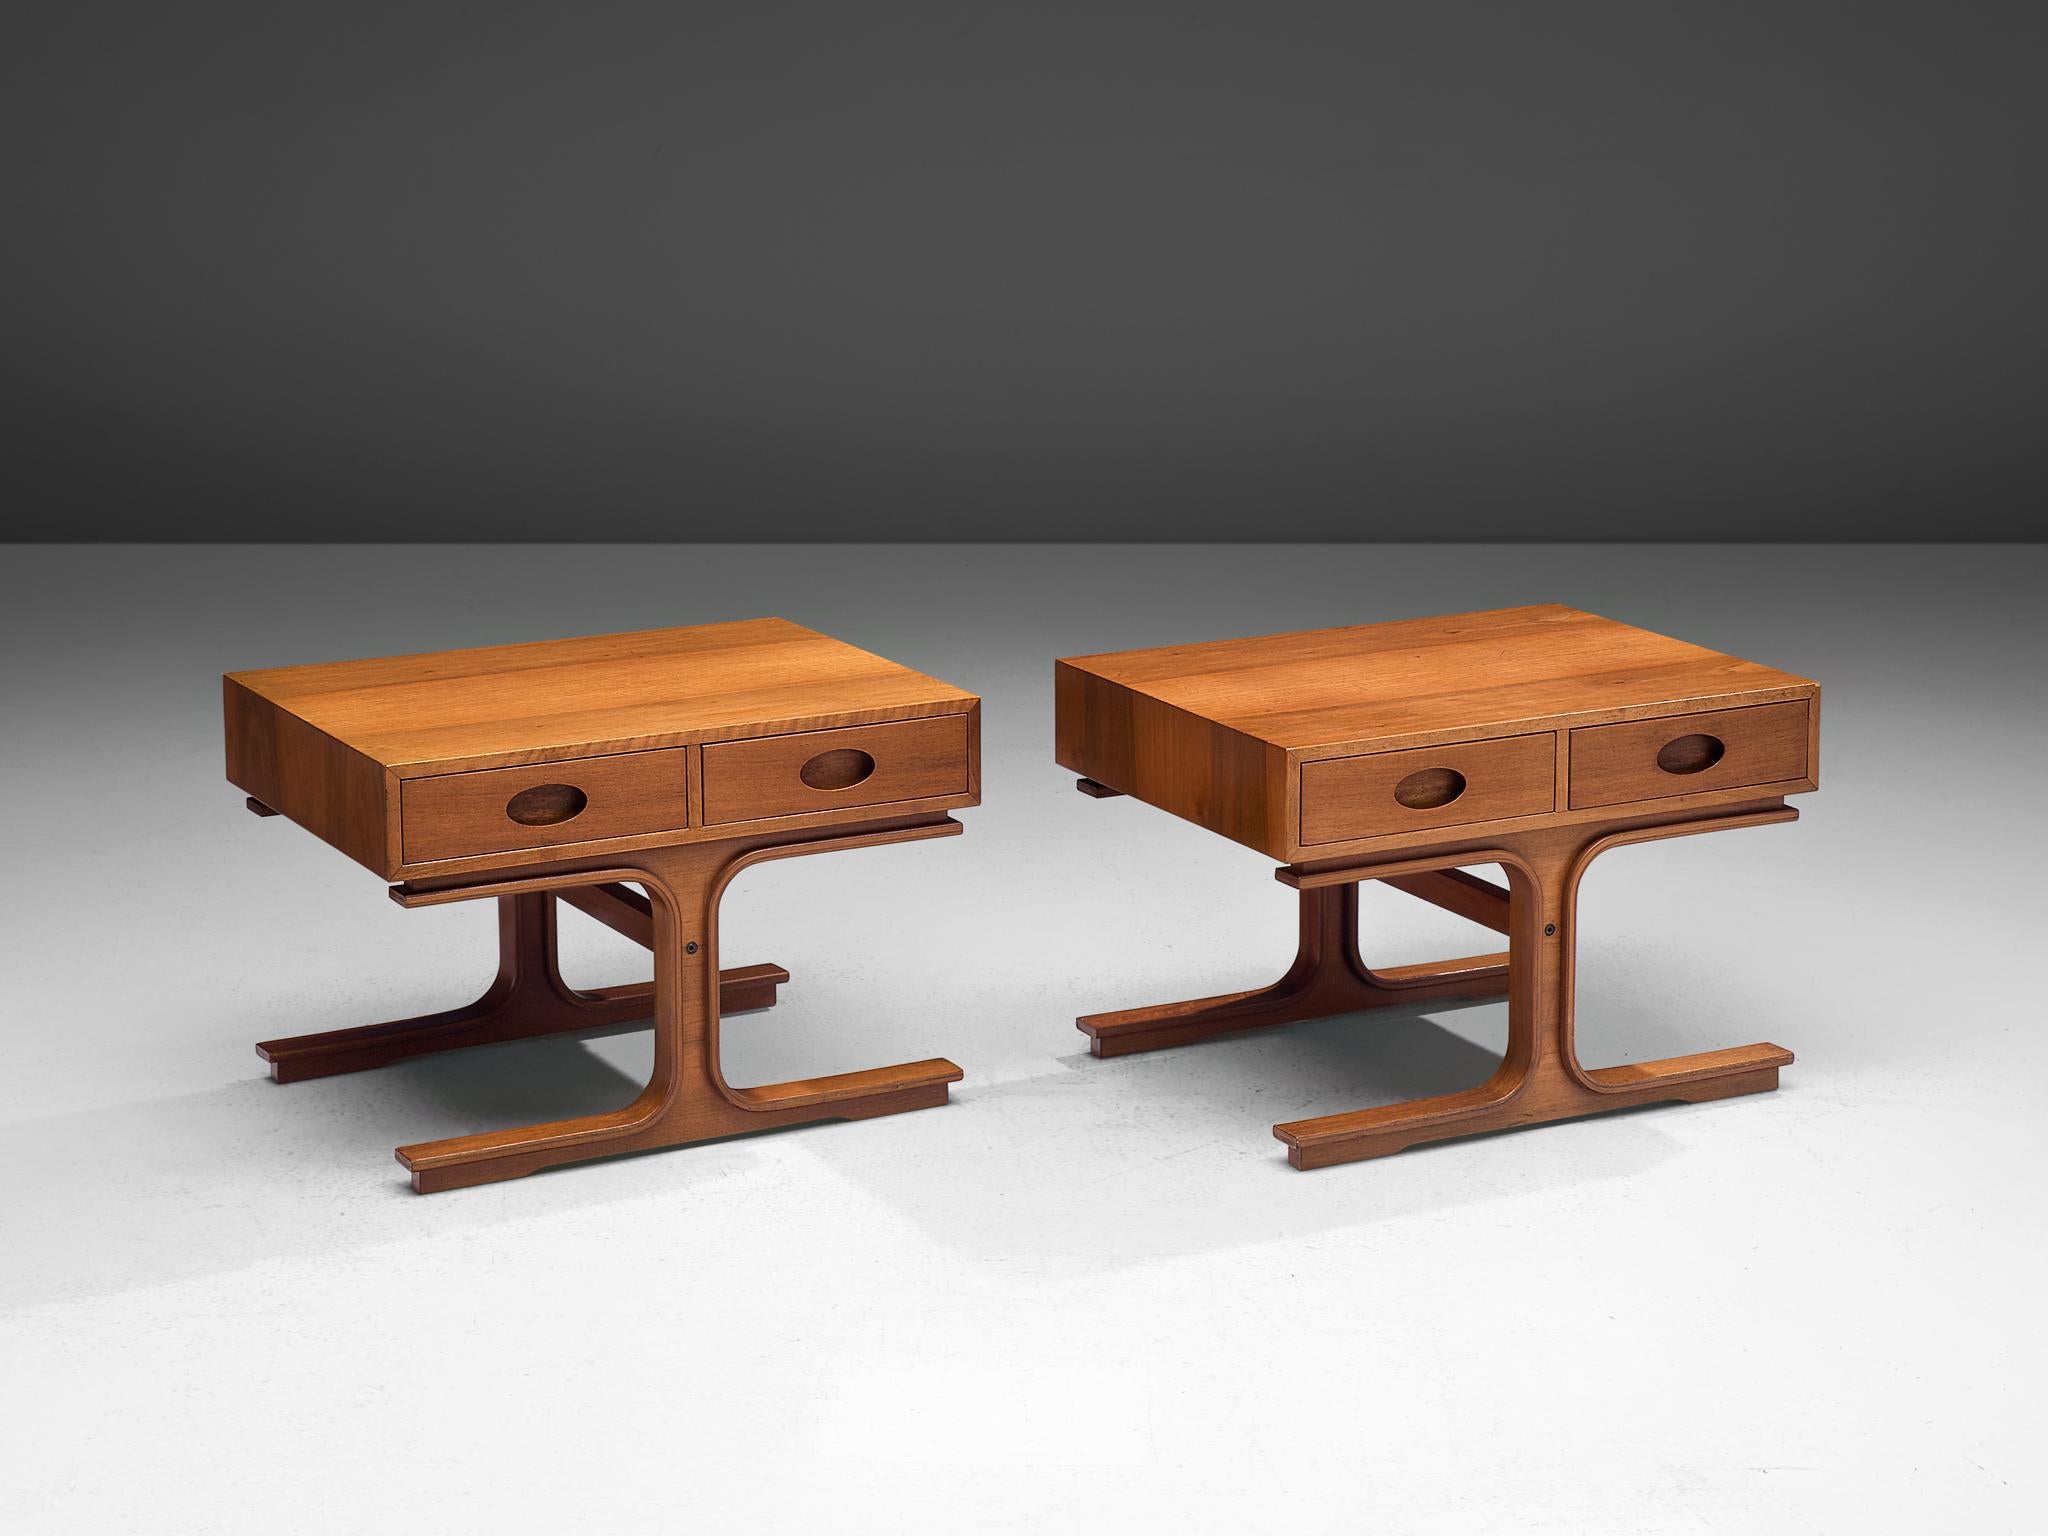 Gianfranco Frattini for Bernini, pair of side tables, walnut, Italy, 1960s.

Stunning pair of side tables by Gianfranco Frattini that feature his typical design traits. For instance, the two drawers with stretched handle but also the legs that